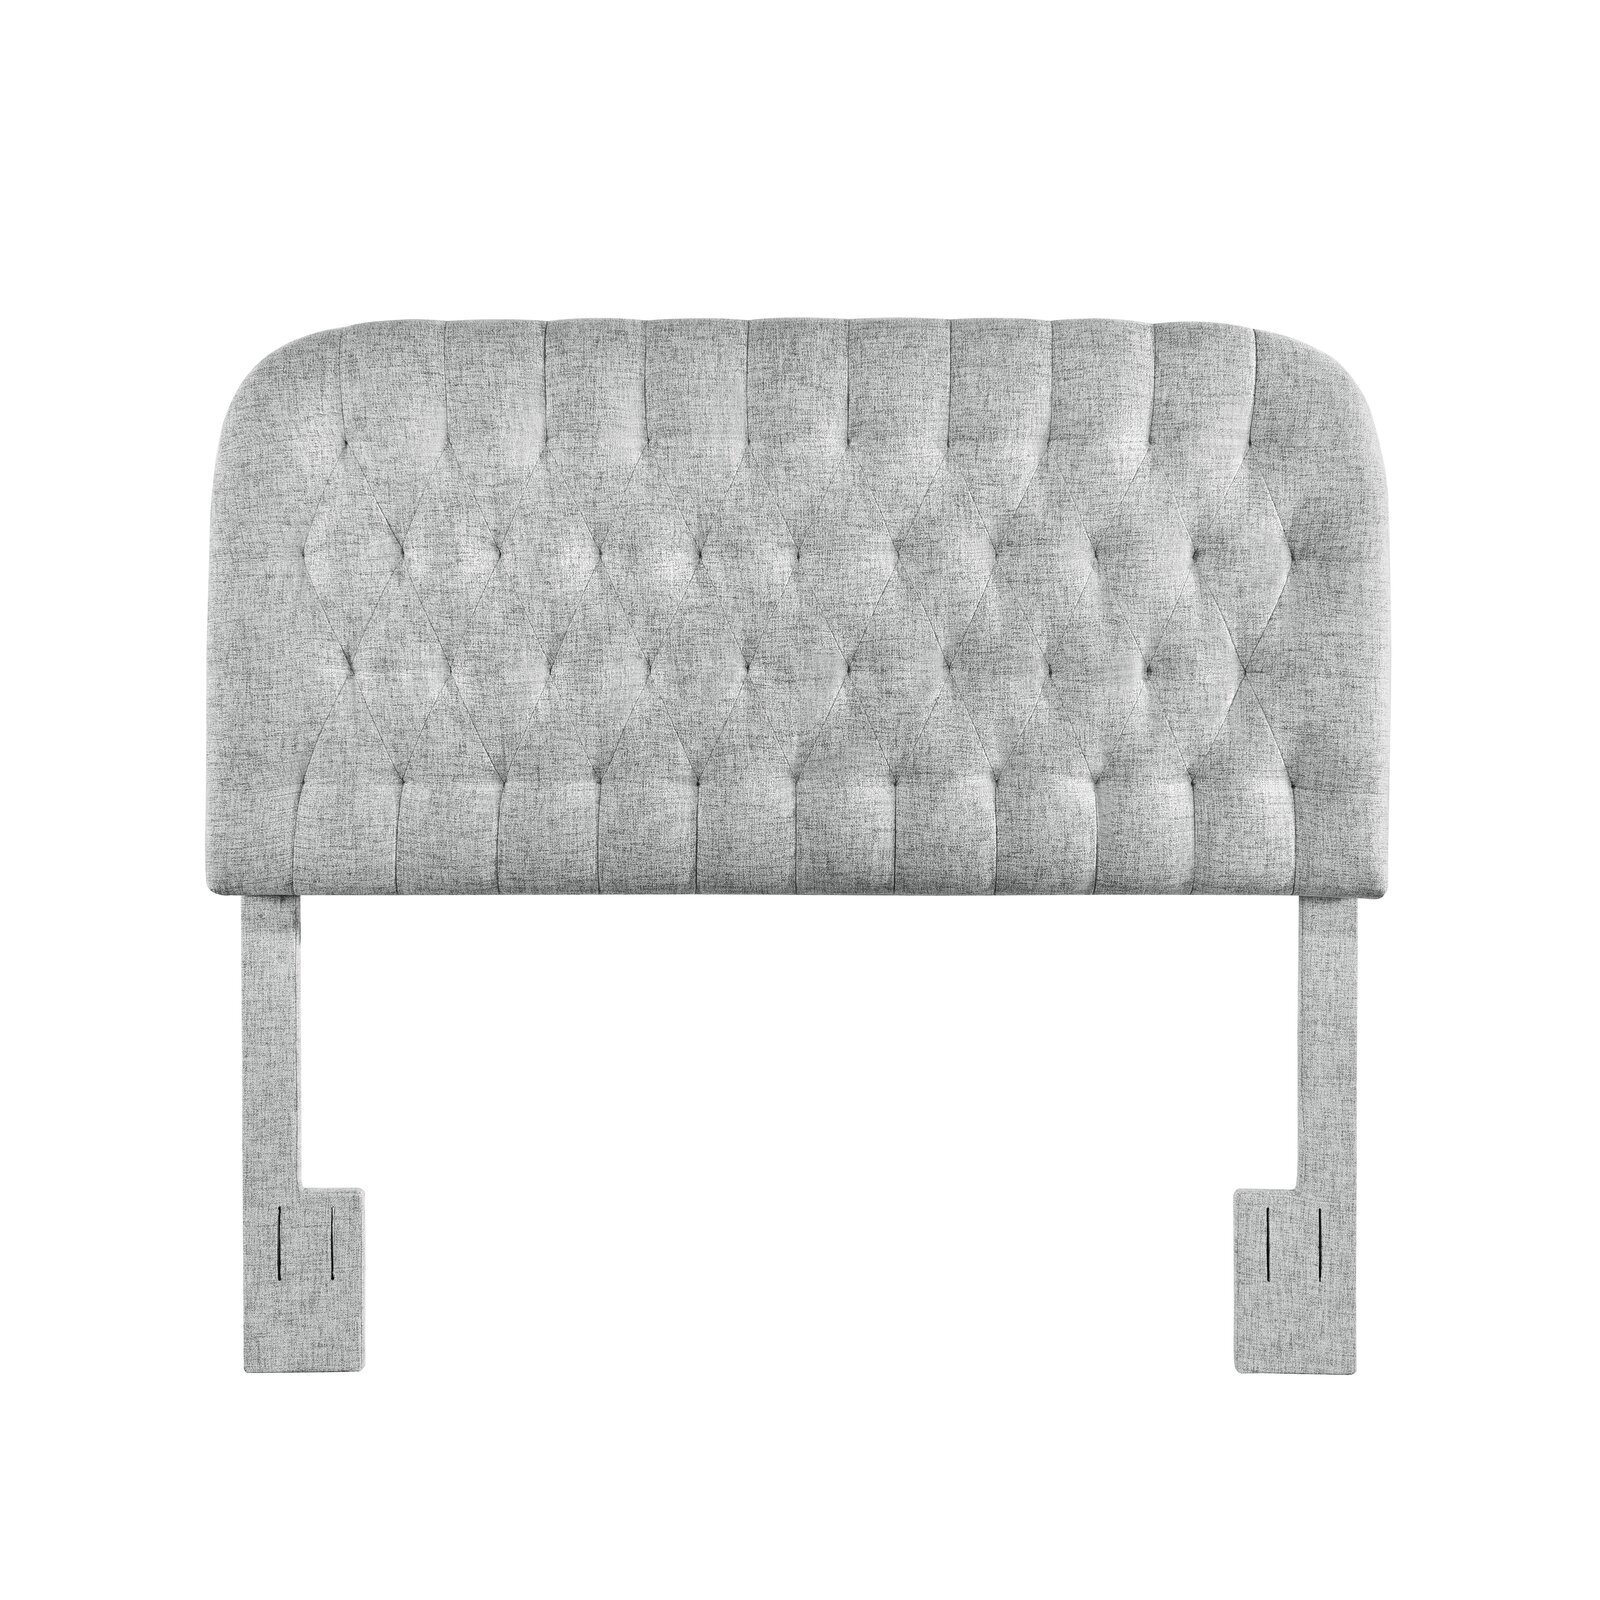 Rounded Silver Upholstered Headboard